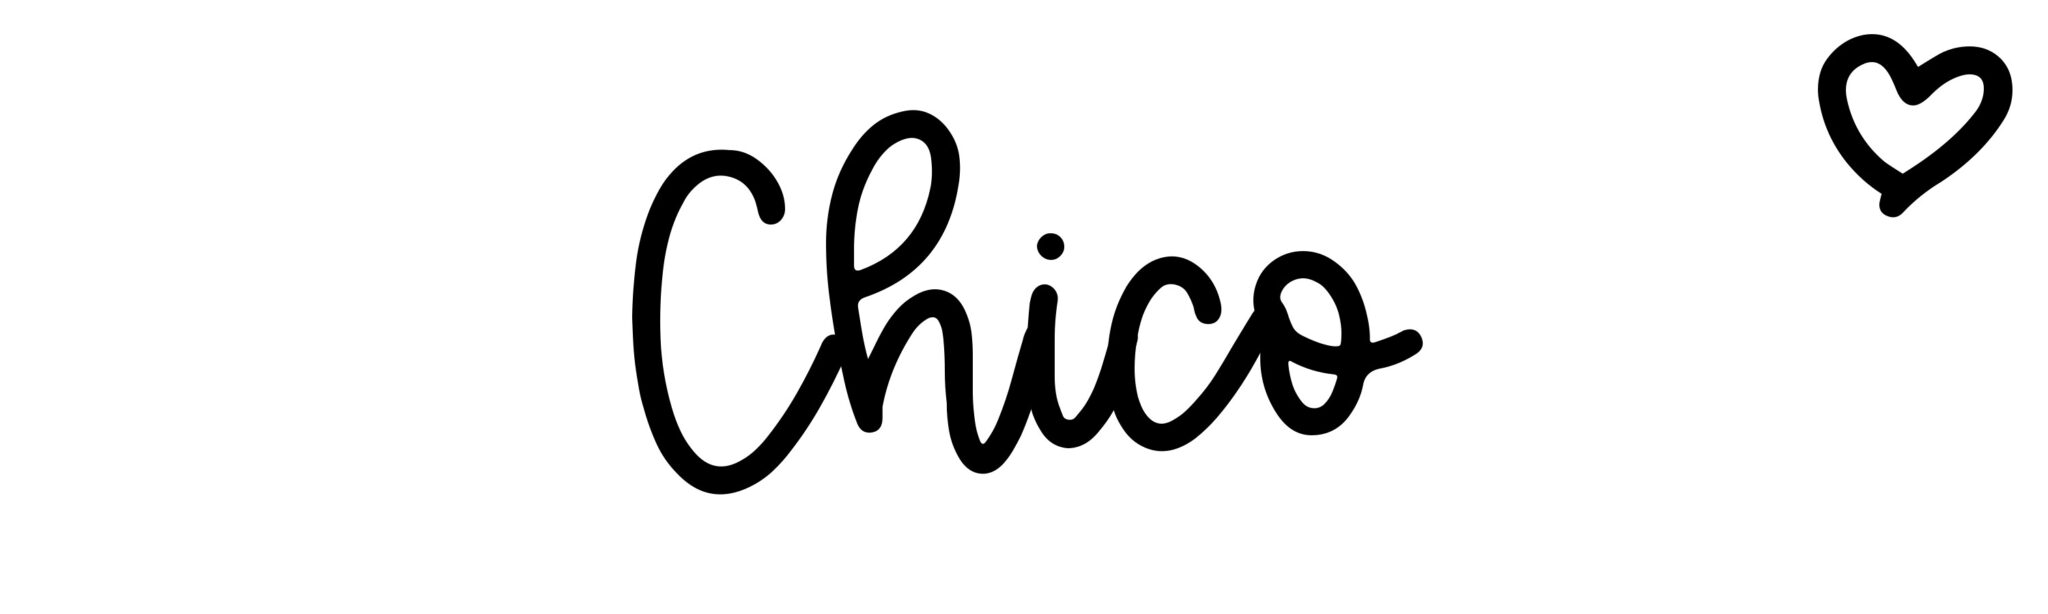 Chico Name meaning, origin, variations and more